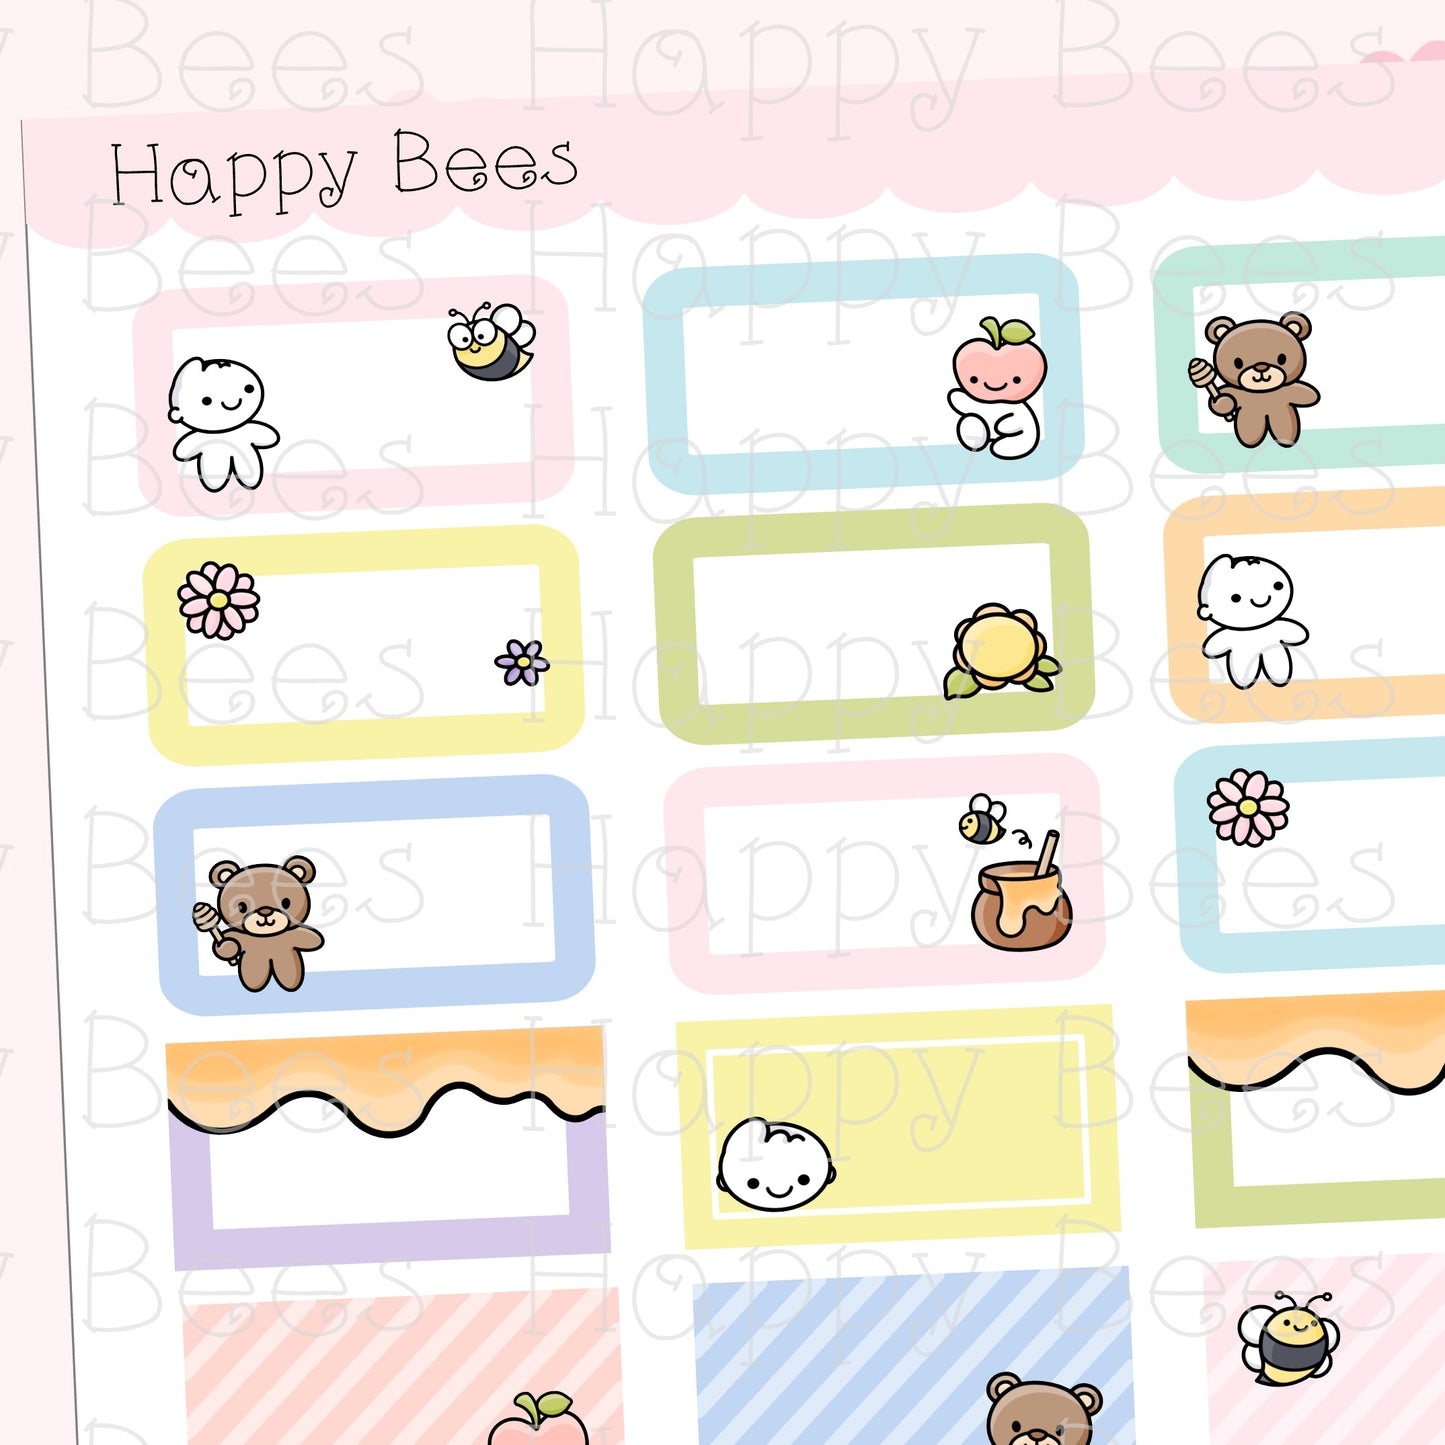 Happy Bees and Friends Half Boxes - Cute Doodles Hobonichi Cousin Planner Stickers F10180